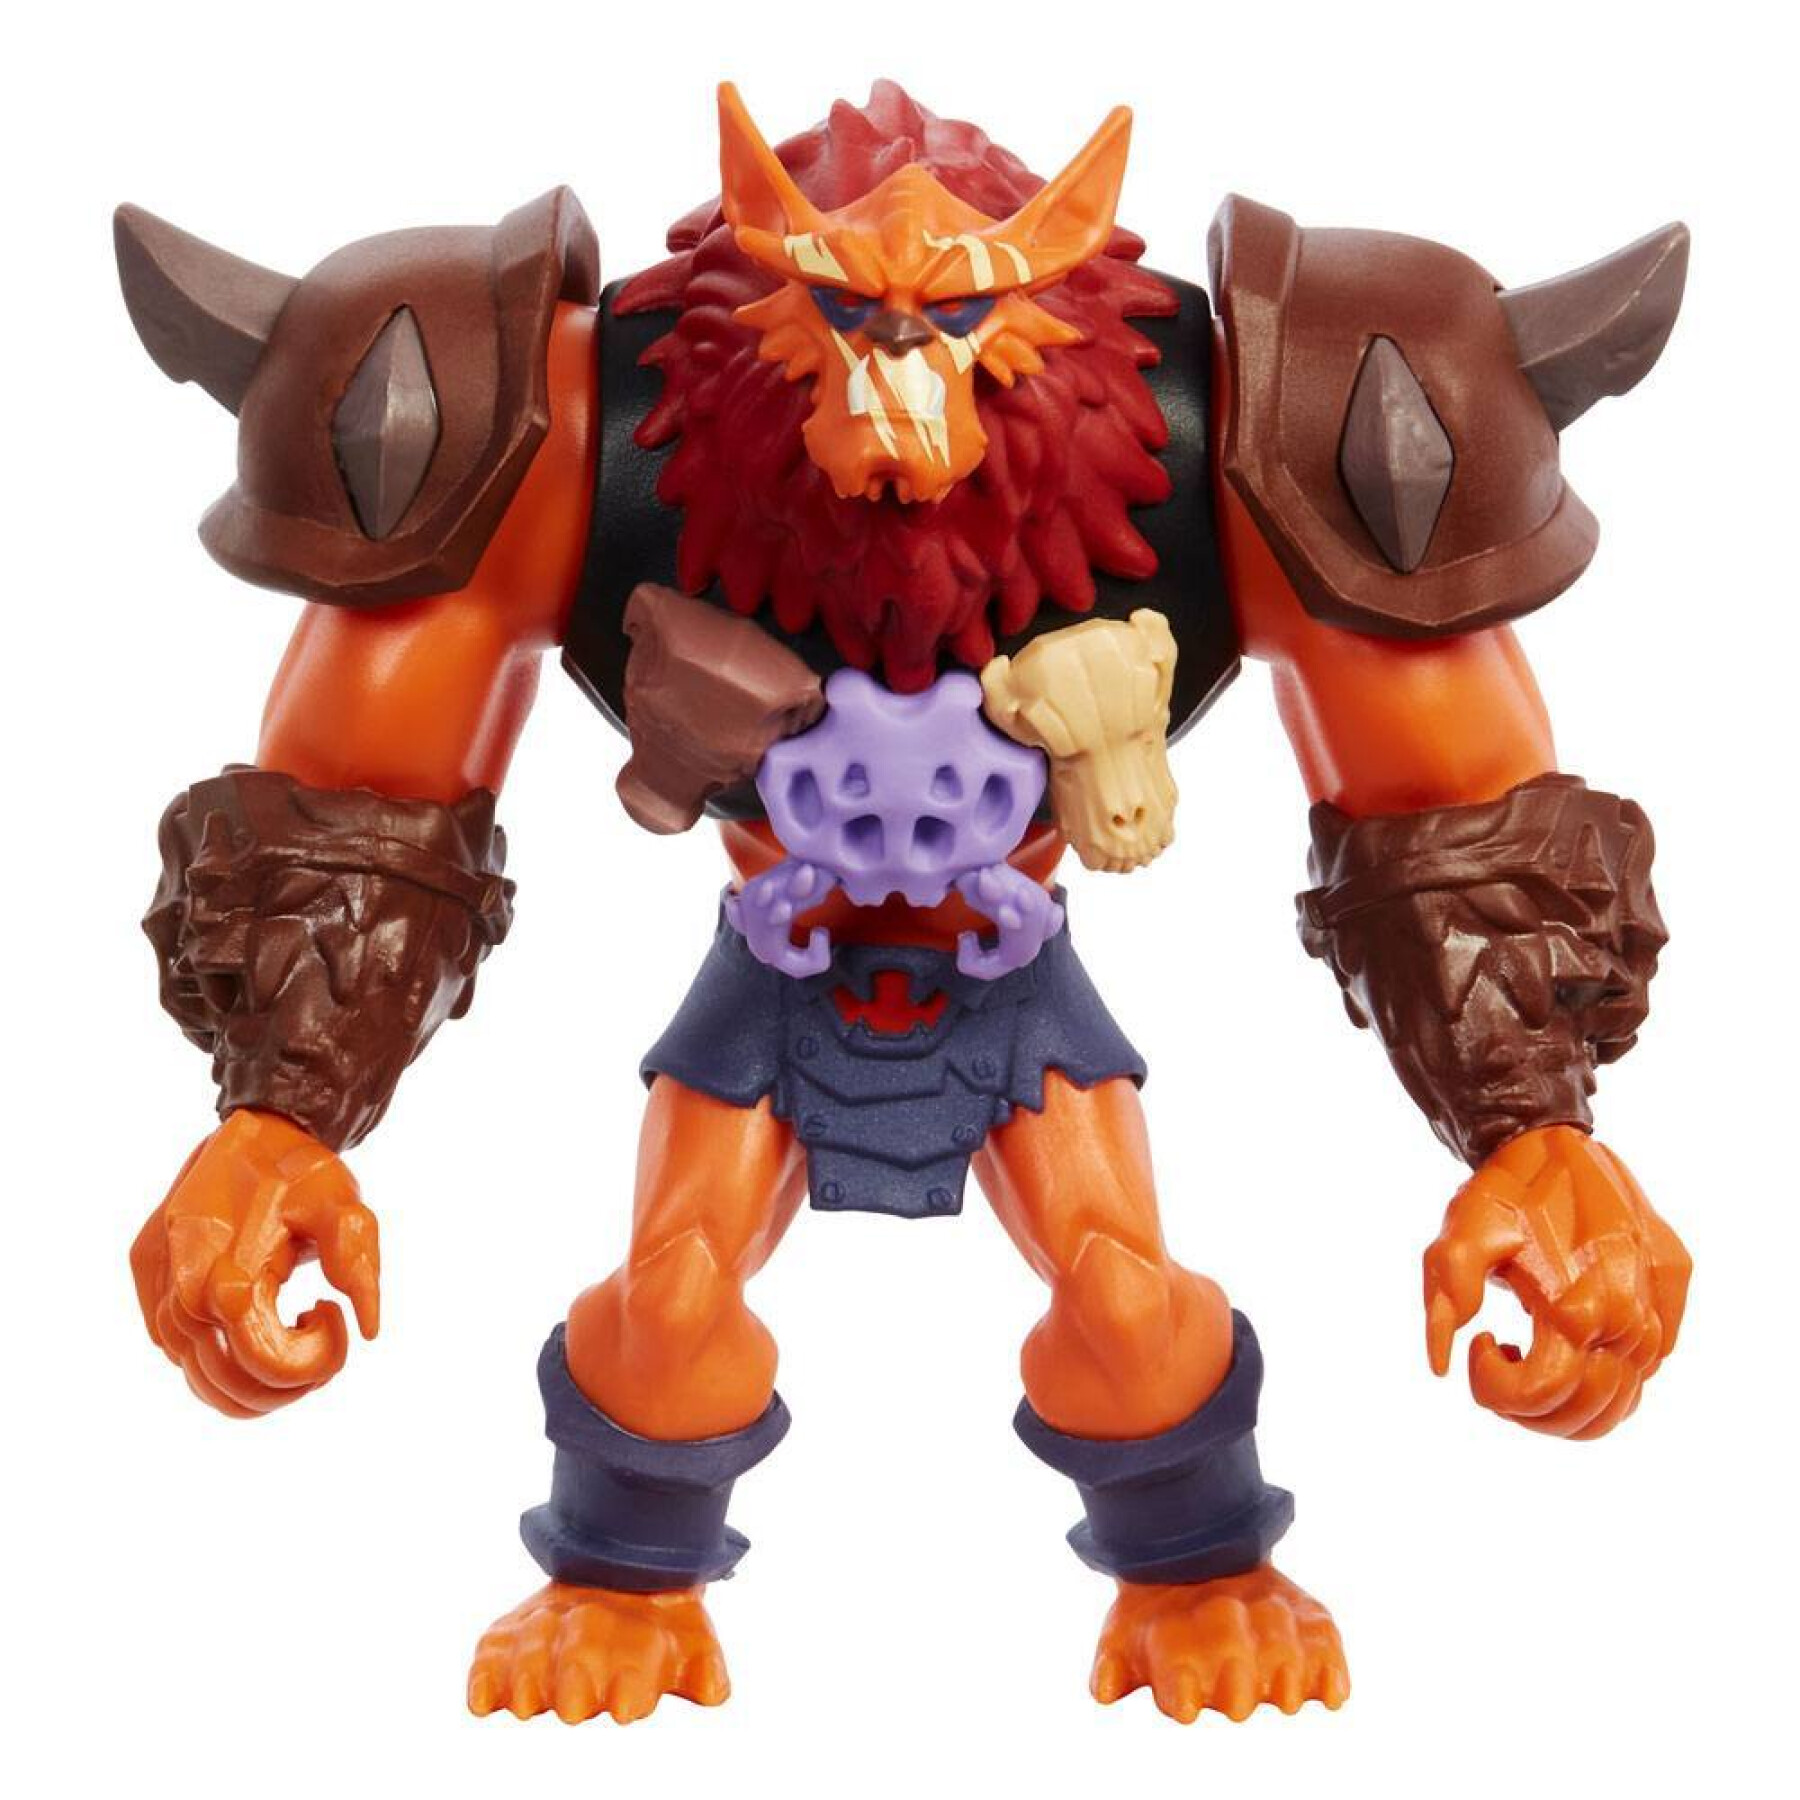 Figurine Mattel He-Man and the Masters of the Universe 2022 Deluxe Beast Man